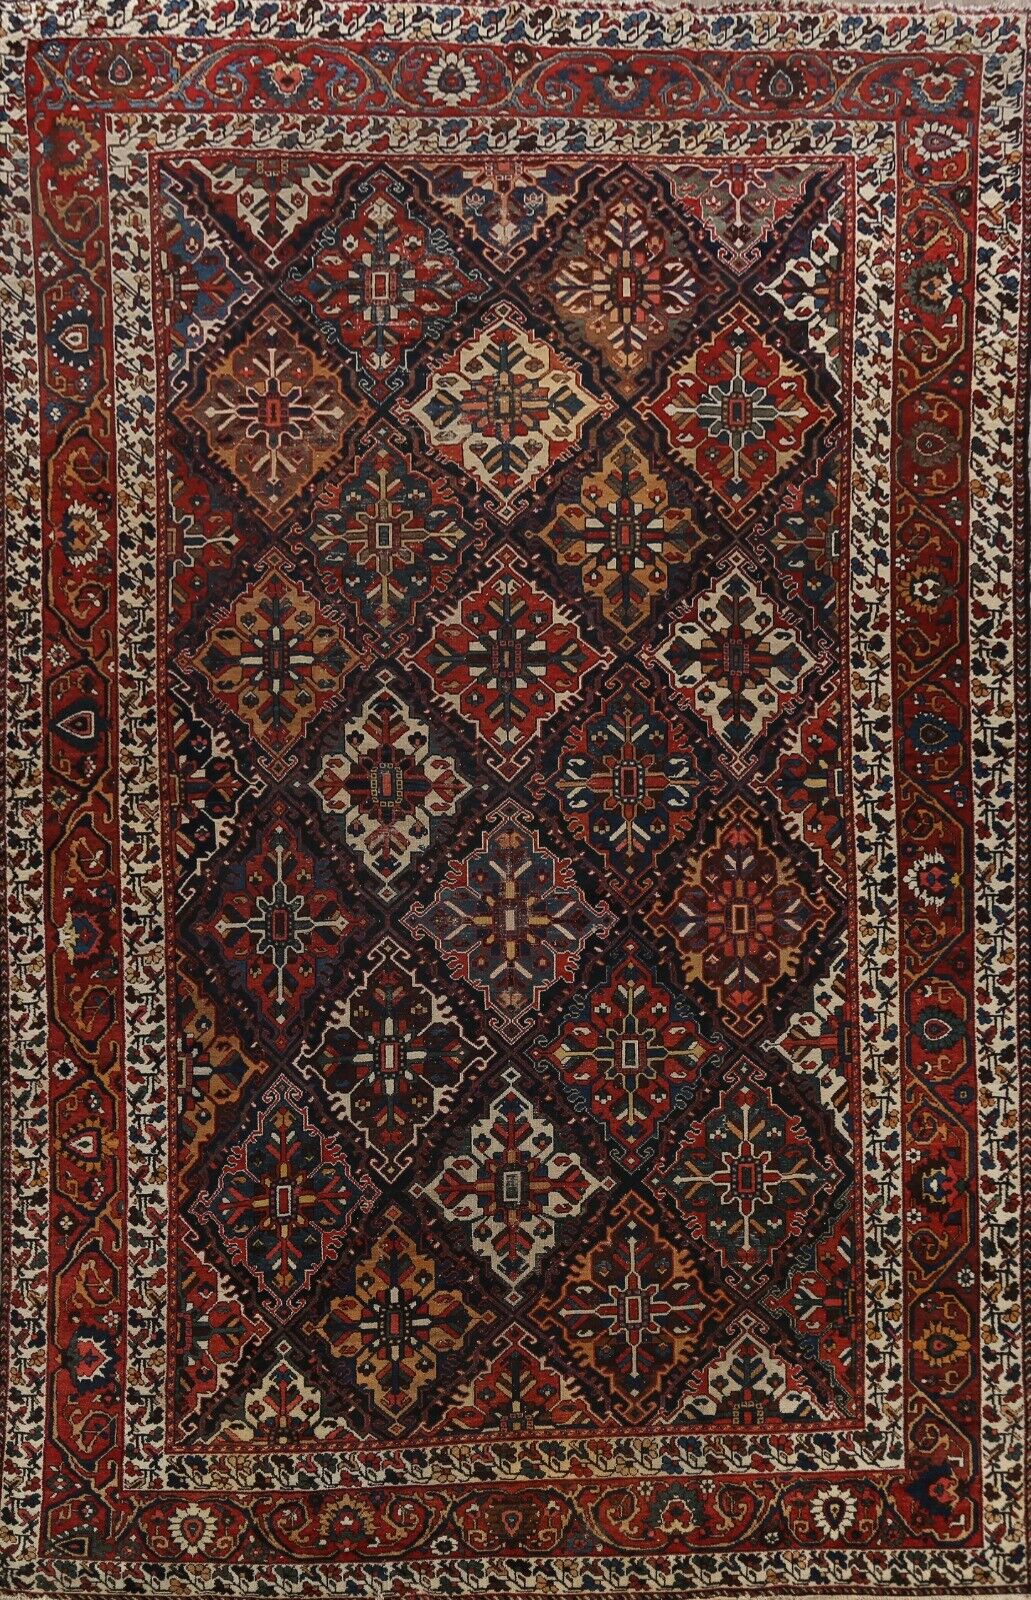 Pre-1900 Bakhtiari Vegetable Dye Area Rug Hand-knotted Over Size 11x17 Carpet